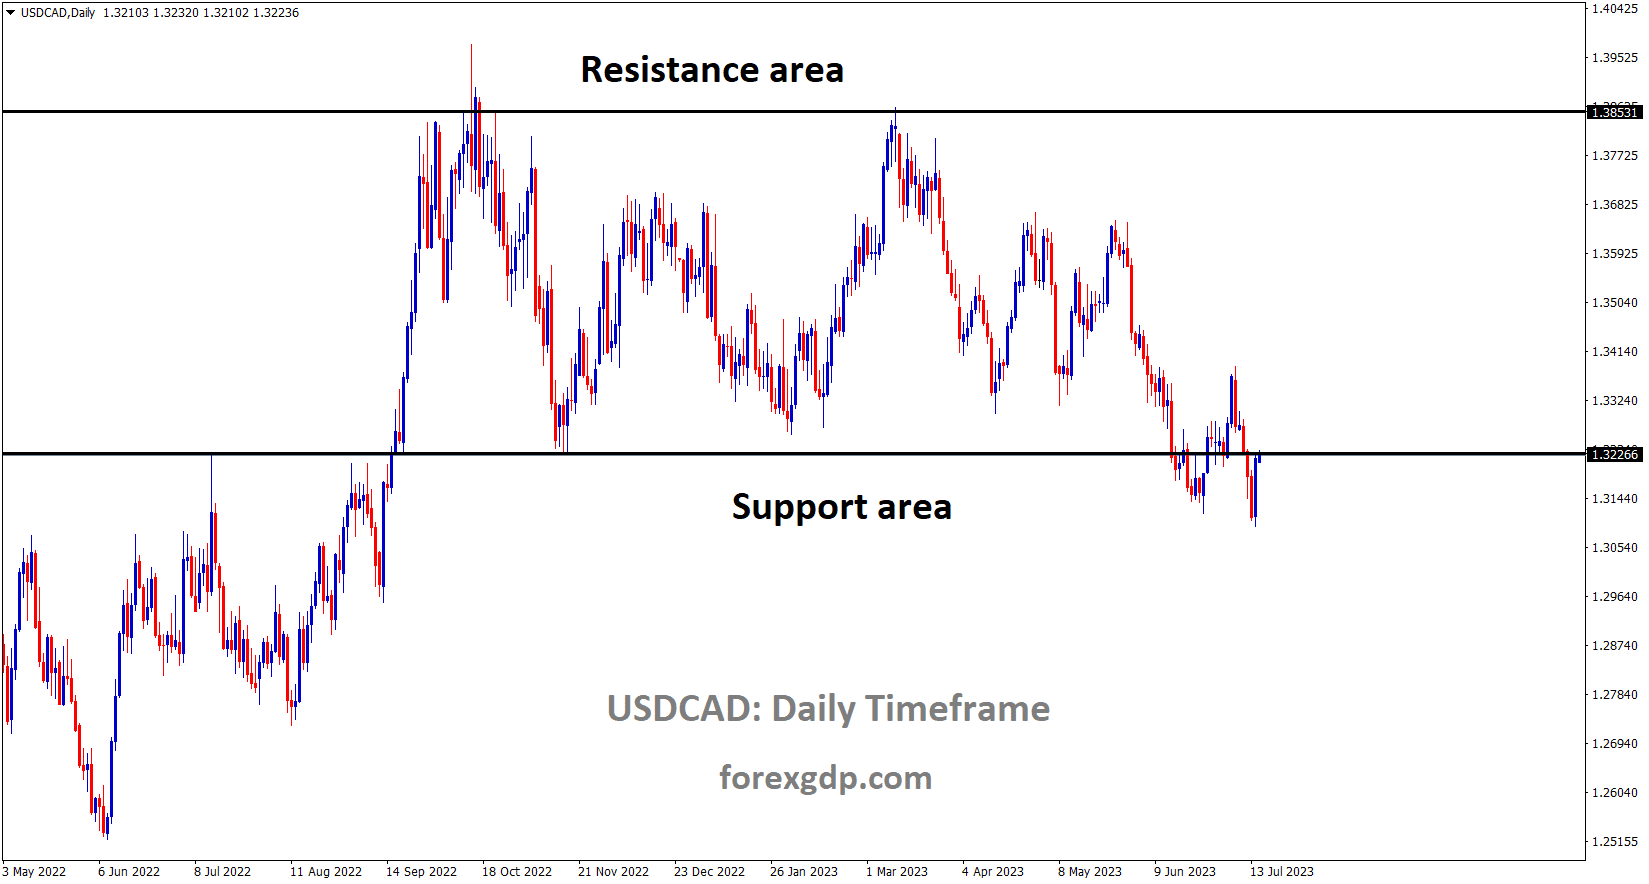 USDCAD is moving in the Box pattern and the market has reached the Horizontal support area of the pattern